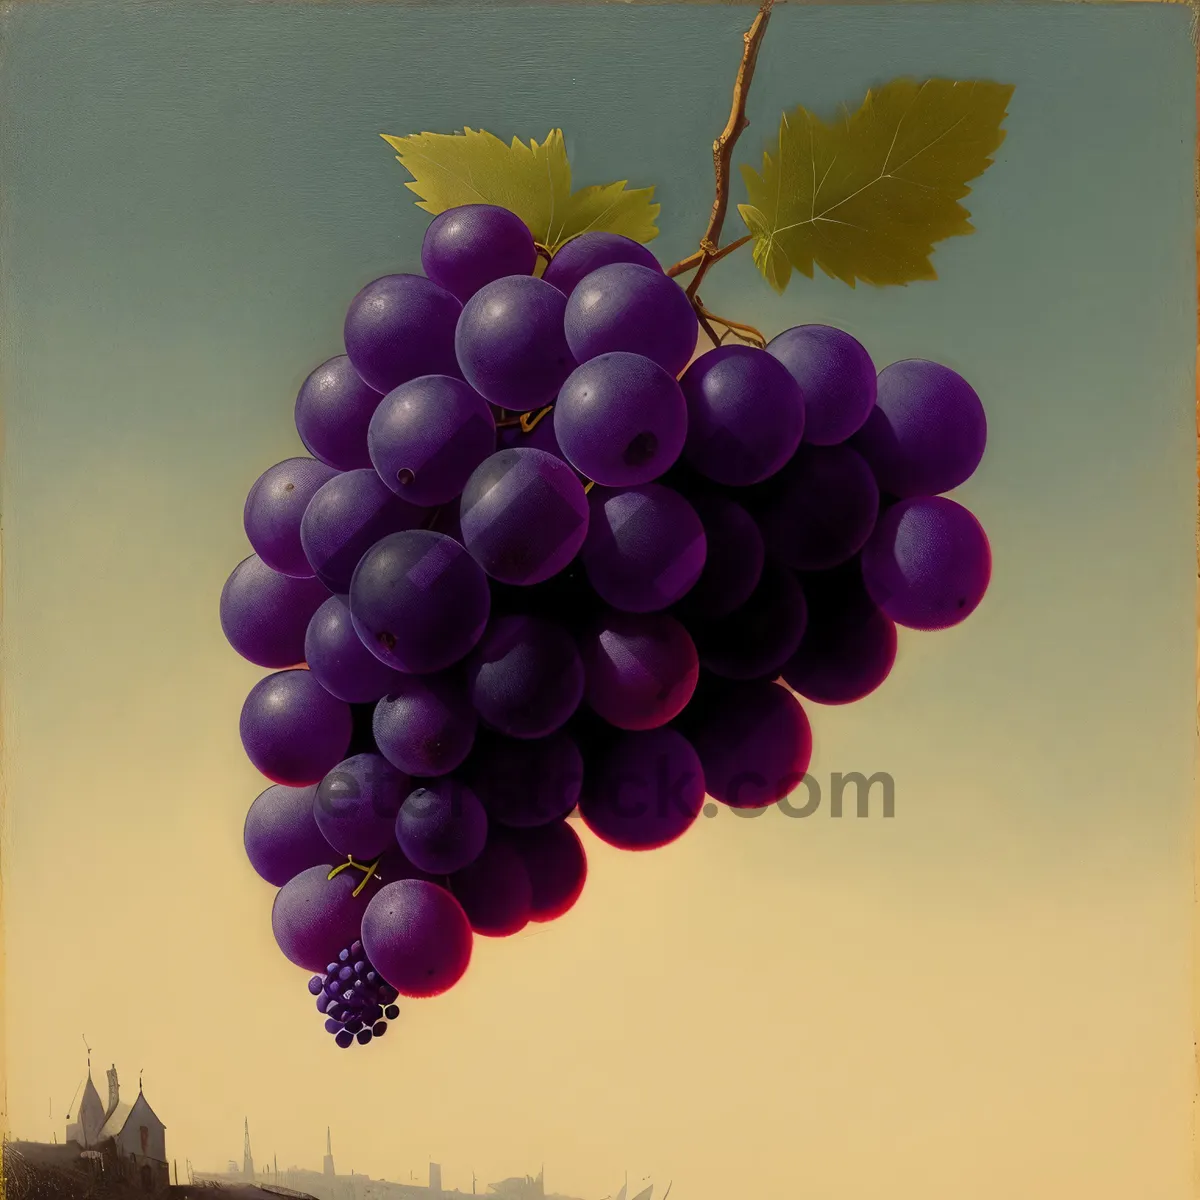 Picture of Autumn Harvest: Juicy Muscat Grapes in a Purple Bunch